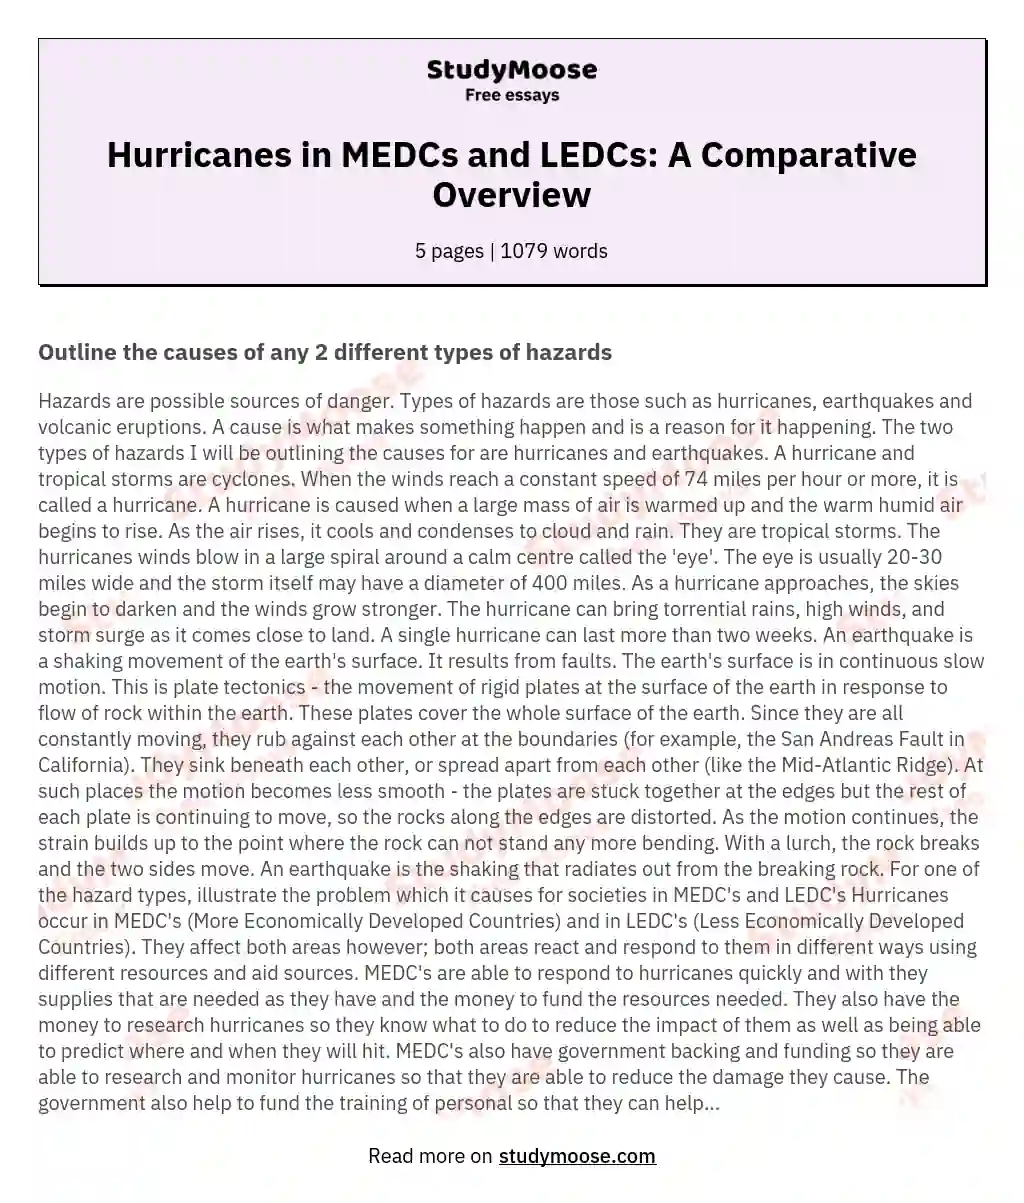 Hurricanes occur in MEDC's (More Economically Developed Countries) and in LEDC's (Less Economically Developed Countries)